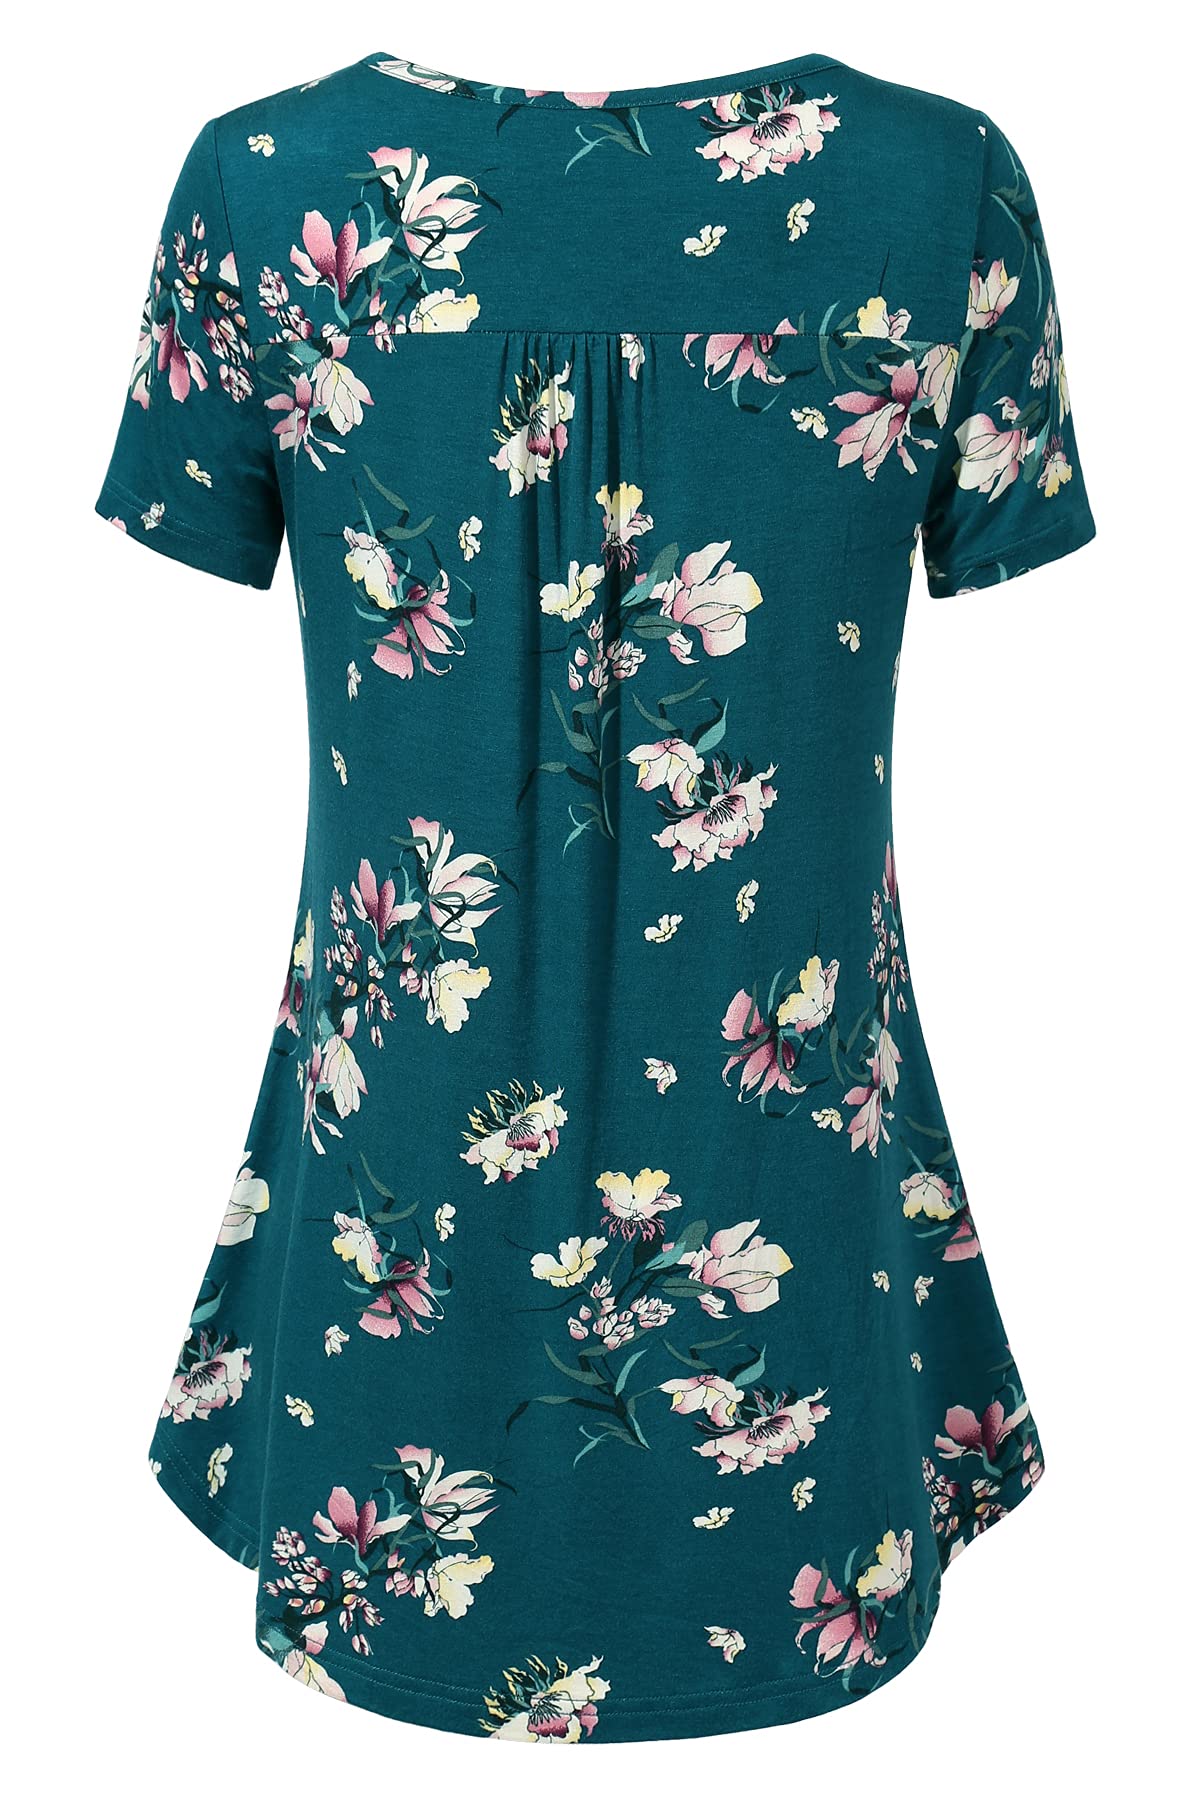 BAISHENGGT Deep Lake Floral Women's V Neck Buttons Pleated Flared Comfy Tunic Tops